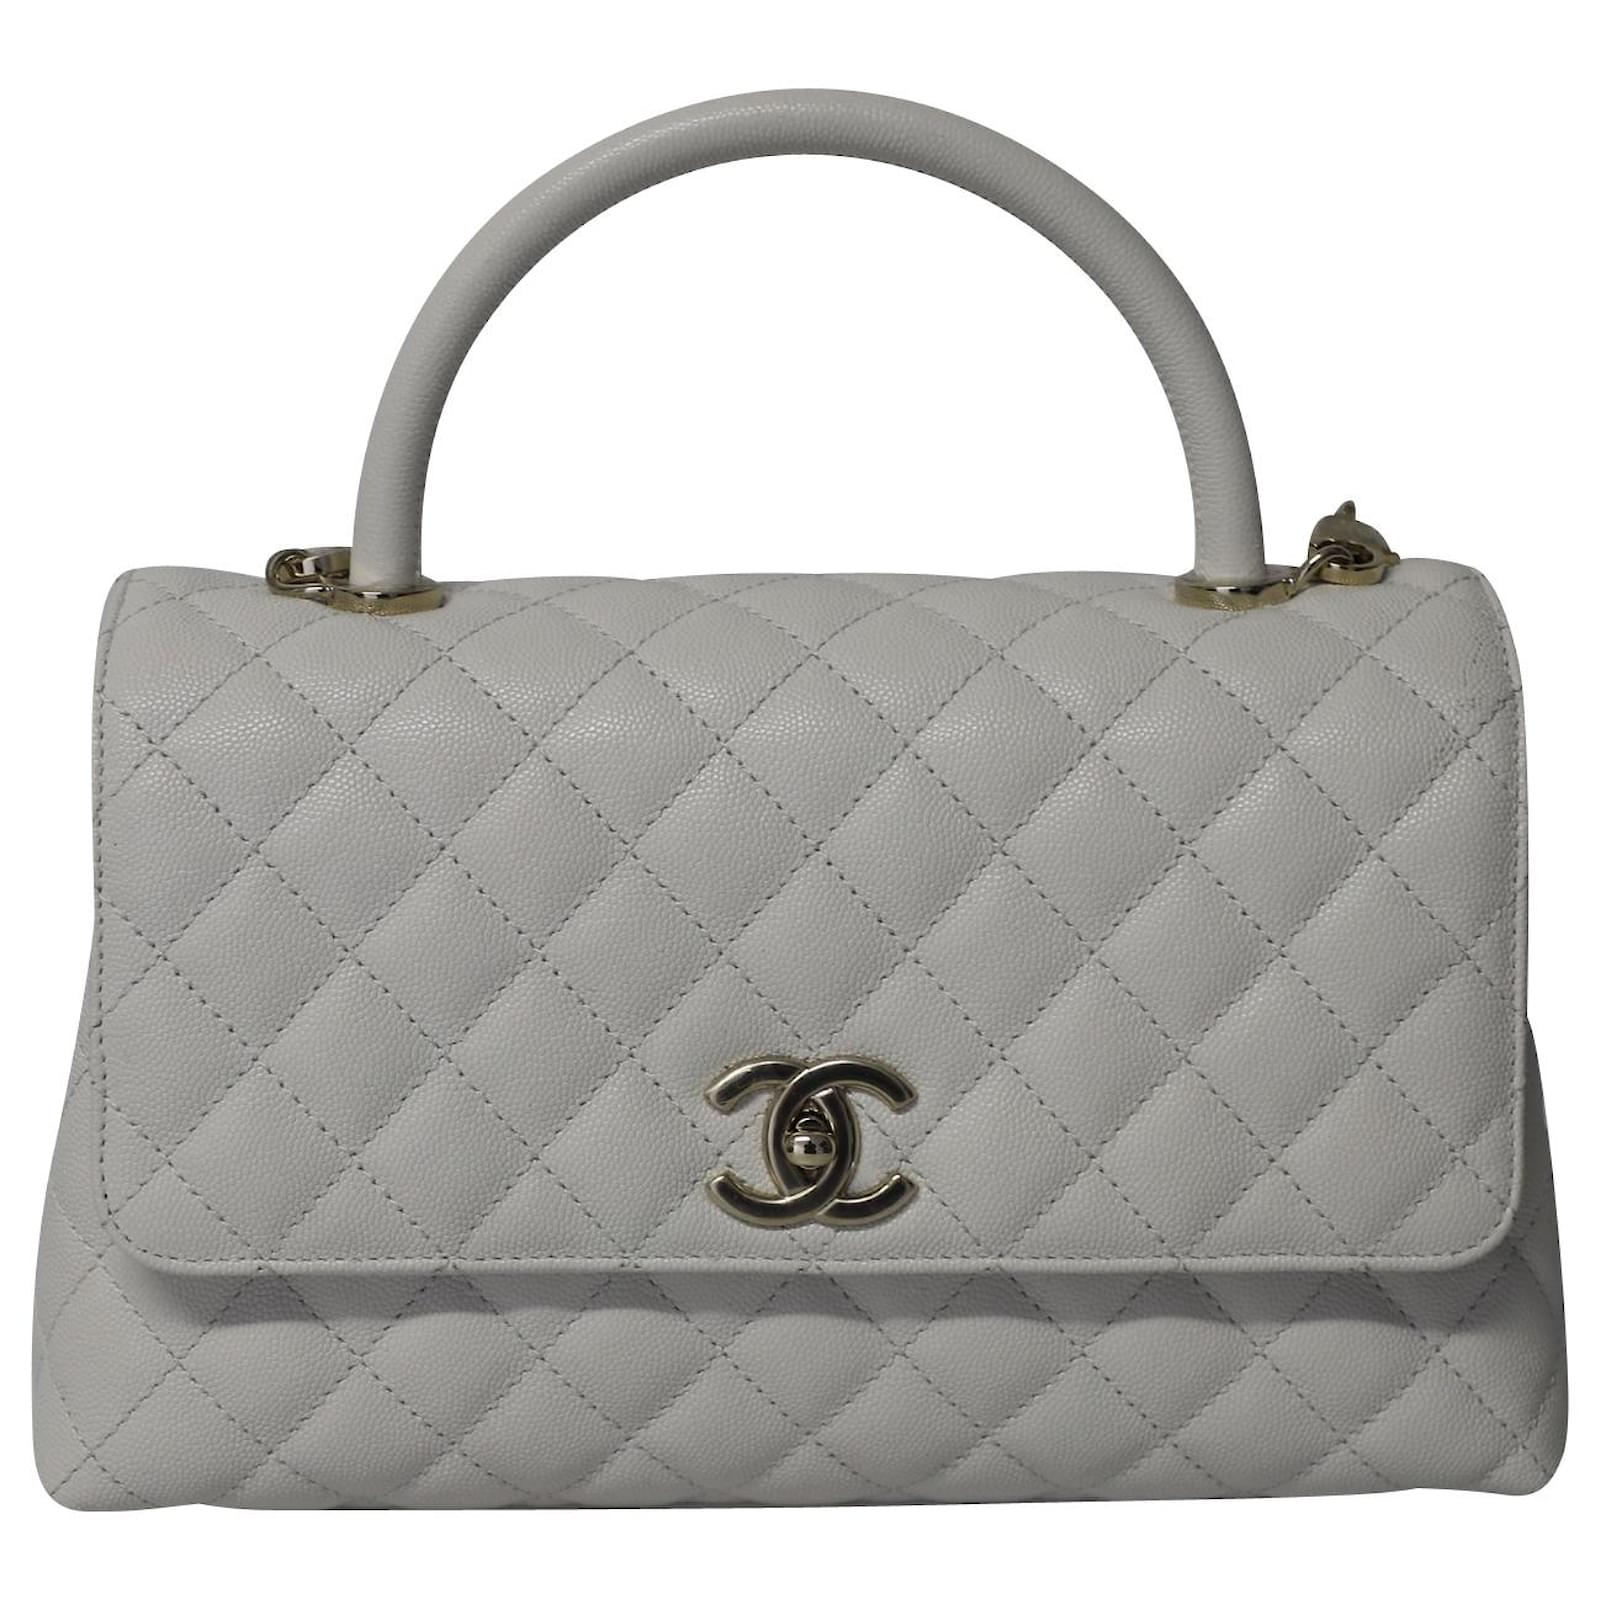 Chanel Diamond Quilted Top Handle Bag in White Caviar Leather